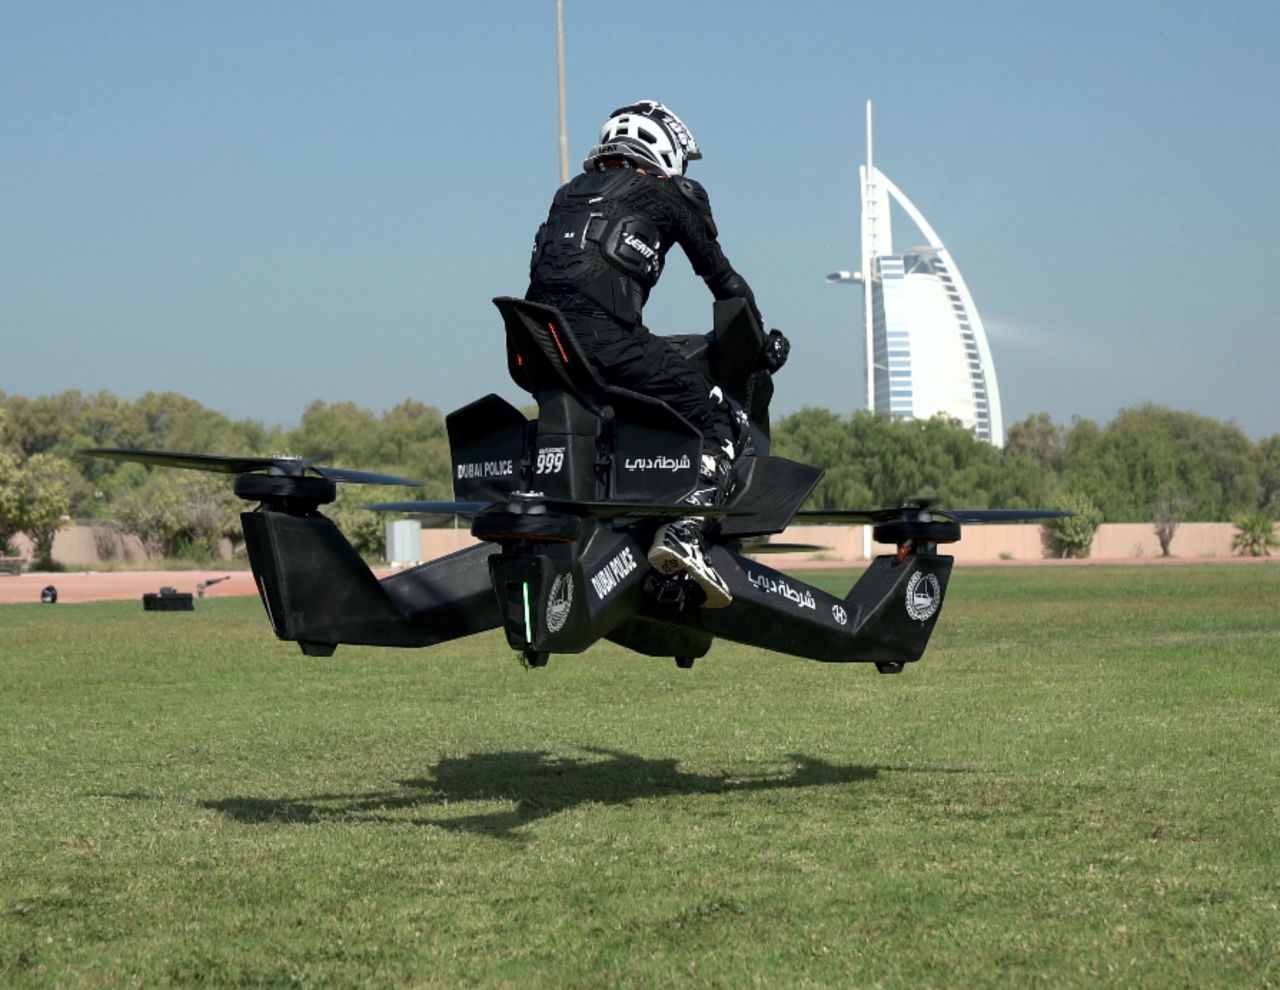 Brigadier Alrazooqi says he aims to have the hoverbikes in action by 2020.